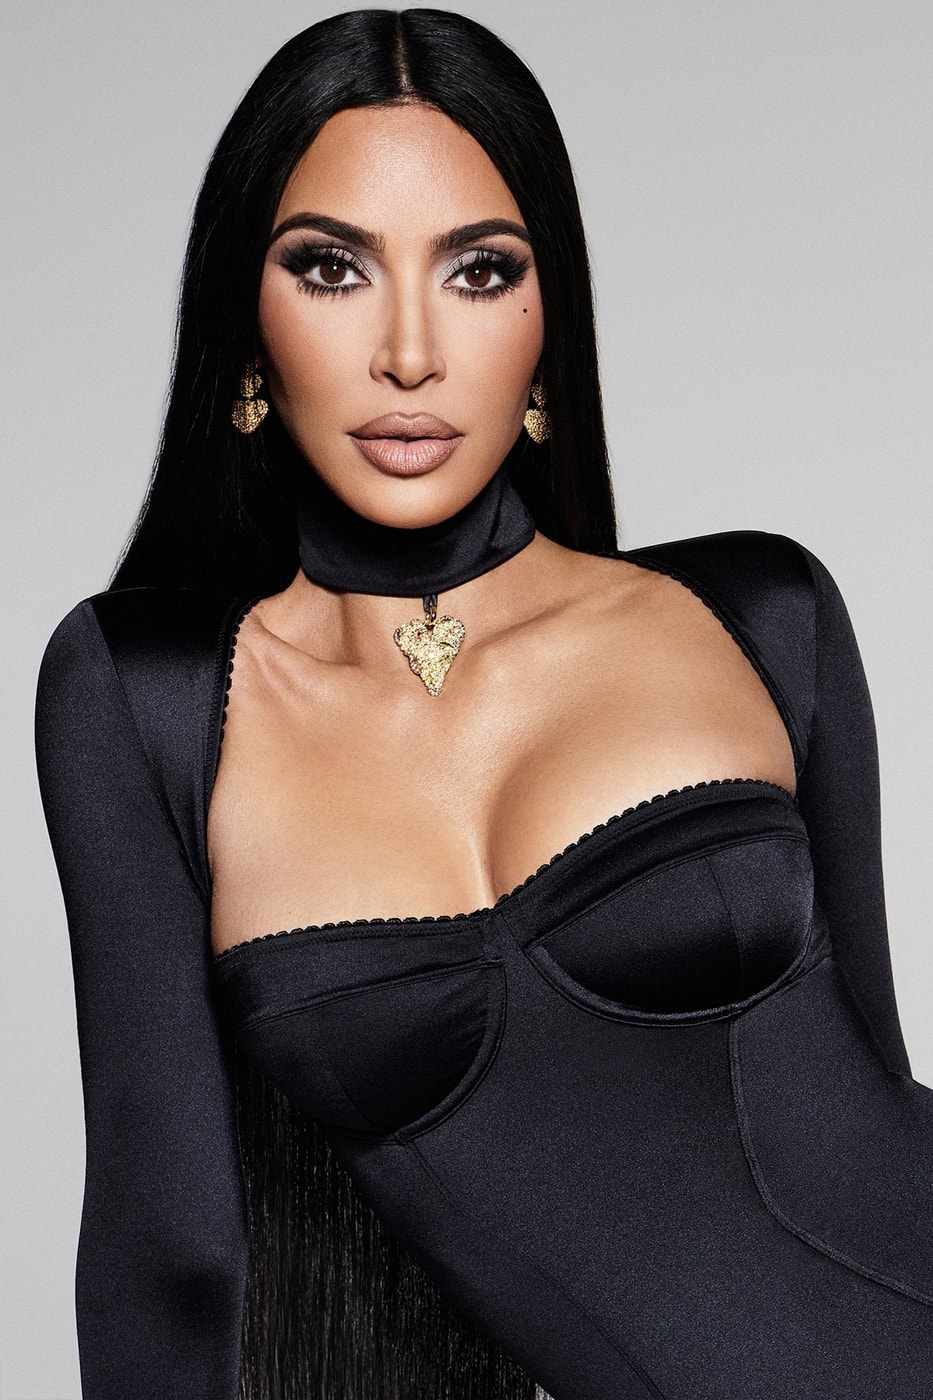 Kim Kardashian - Looking for a last-minute, easy gift? SKIMS e-gift cards  start at $25+ and only take minutes to purchase online at SKIMS.COM. #SKIMS